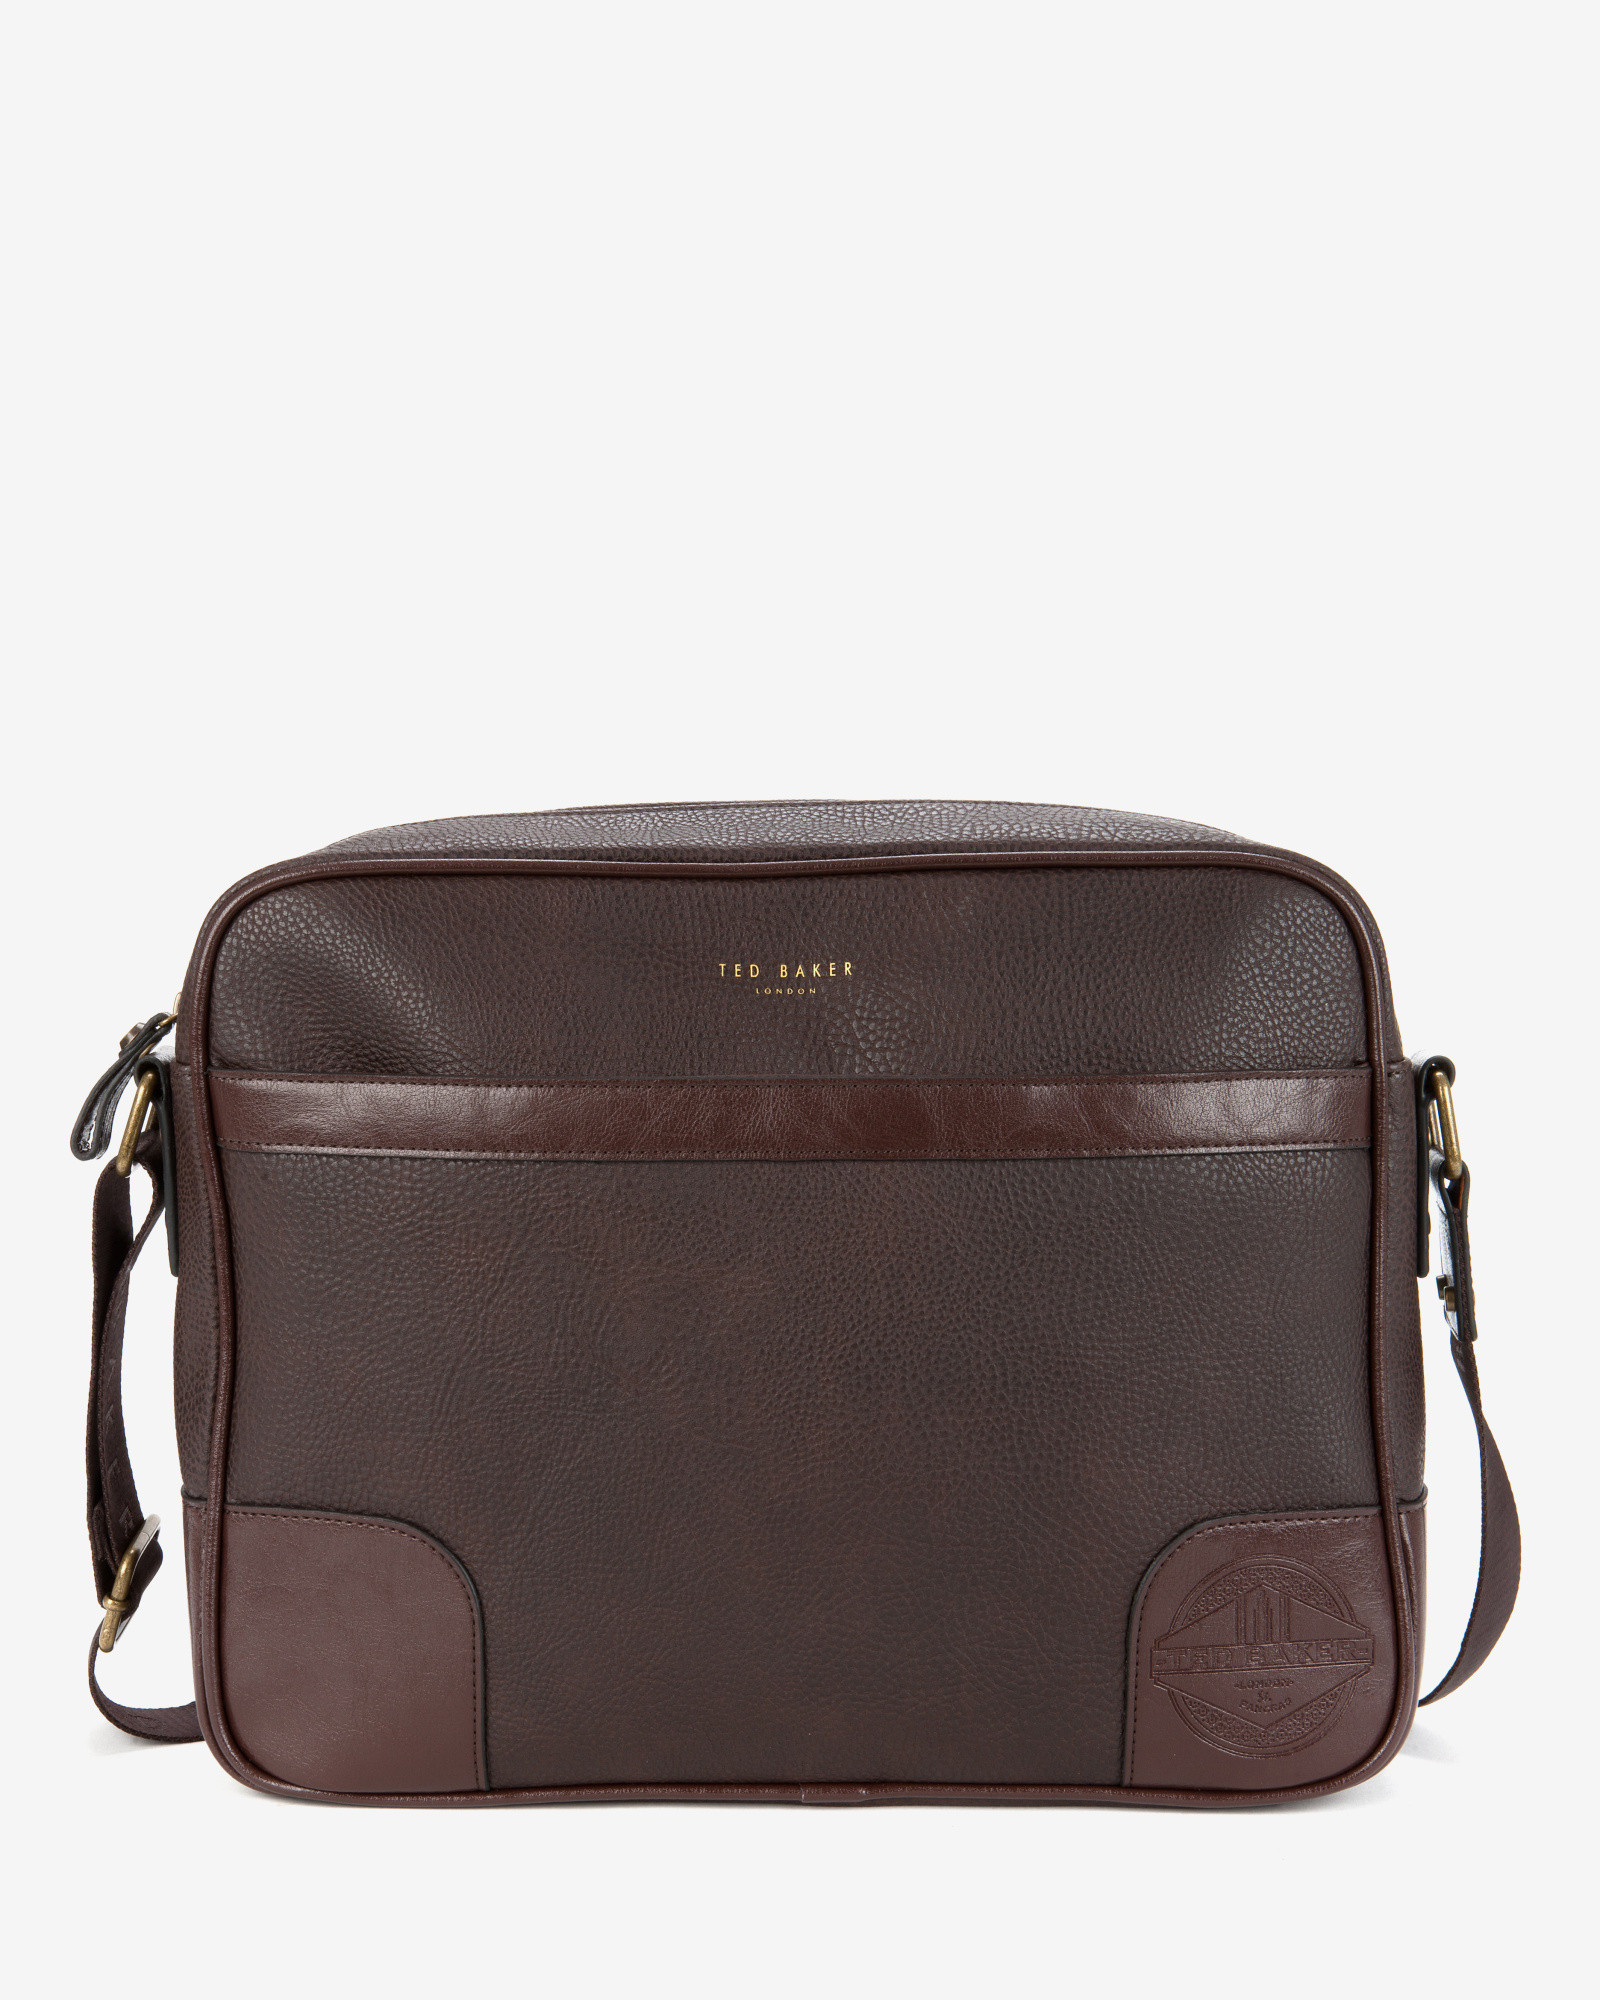 ted-baker-brown-embossed-document-bag-product-1-26980623-0-149534731-normal.jpeg